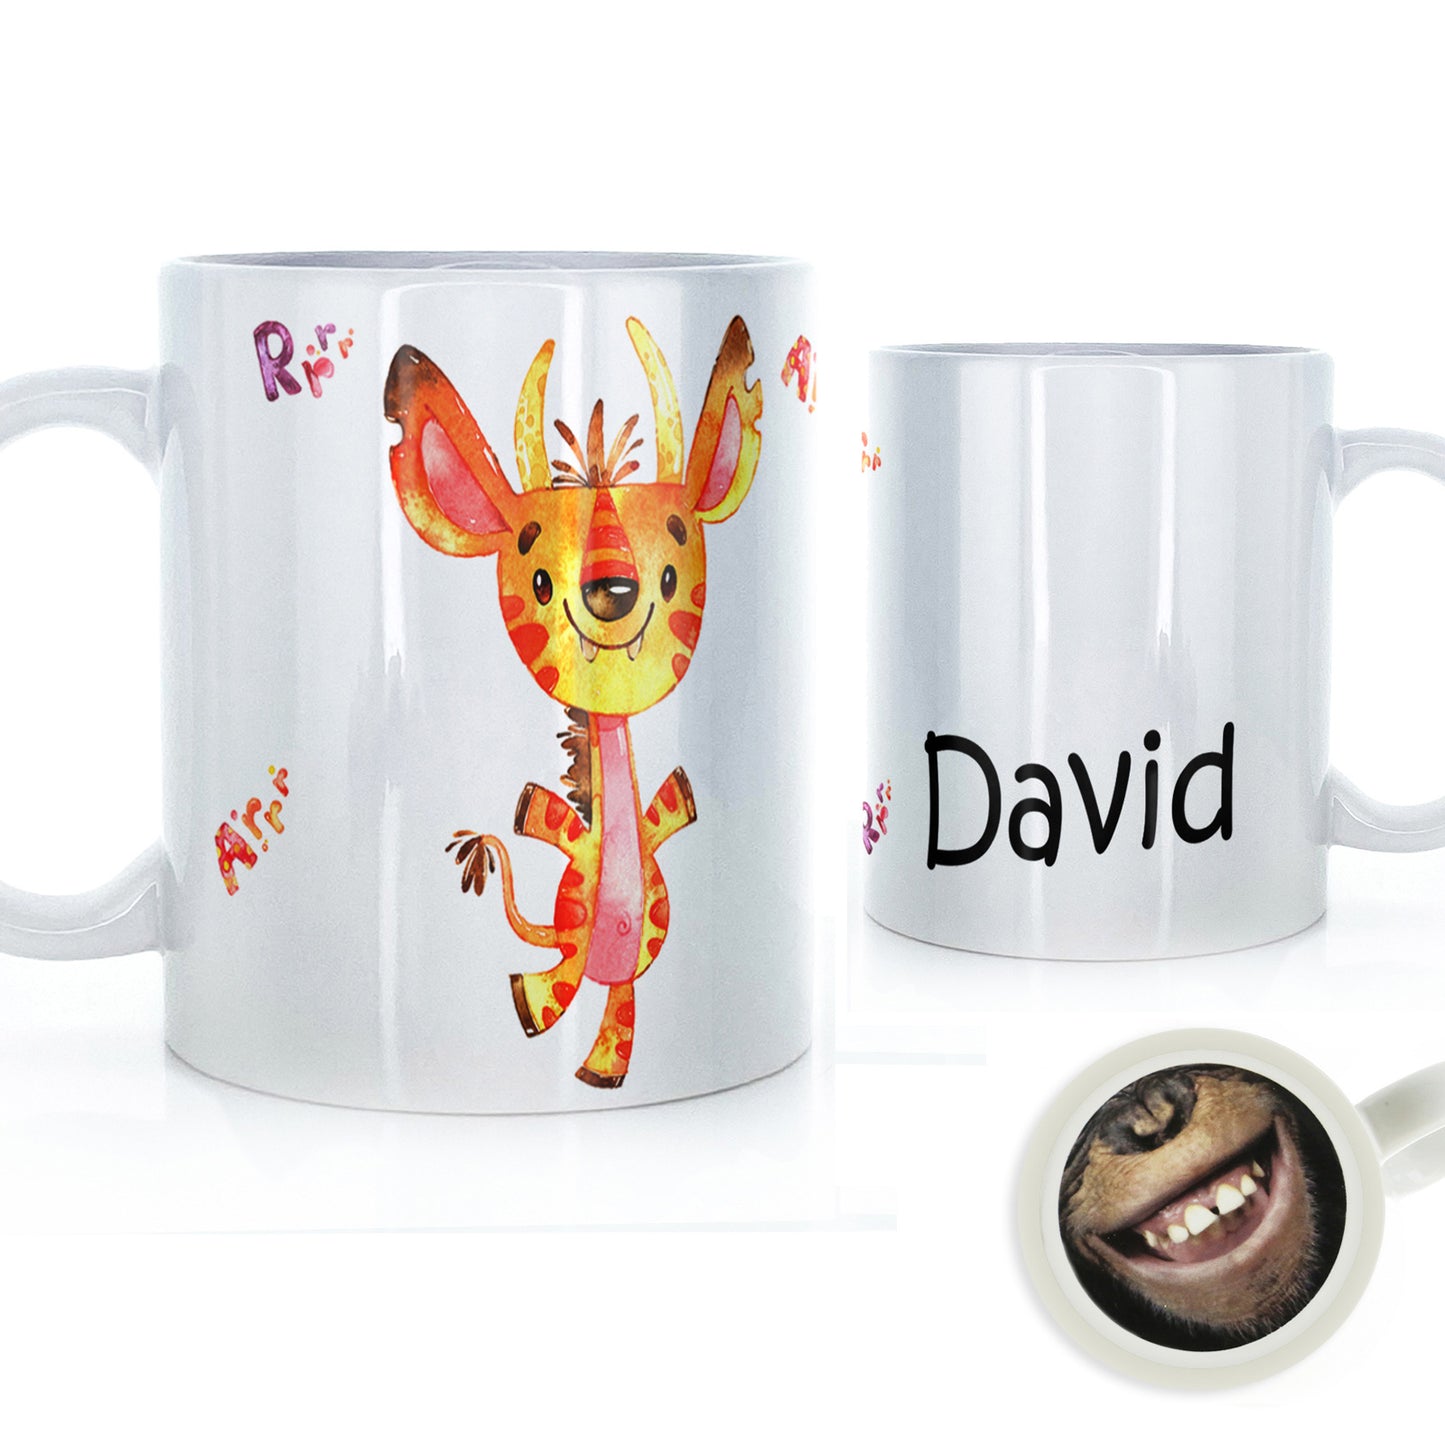 Personalised Mug with Childish Text and Horned Growling Orange Monster